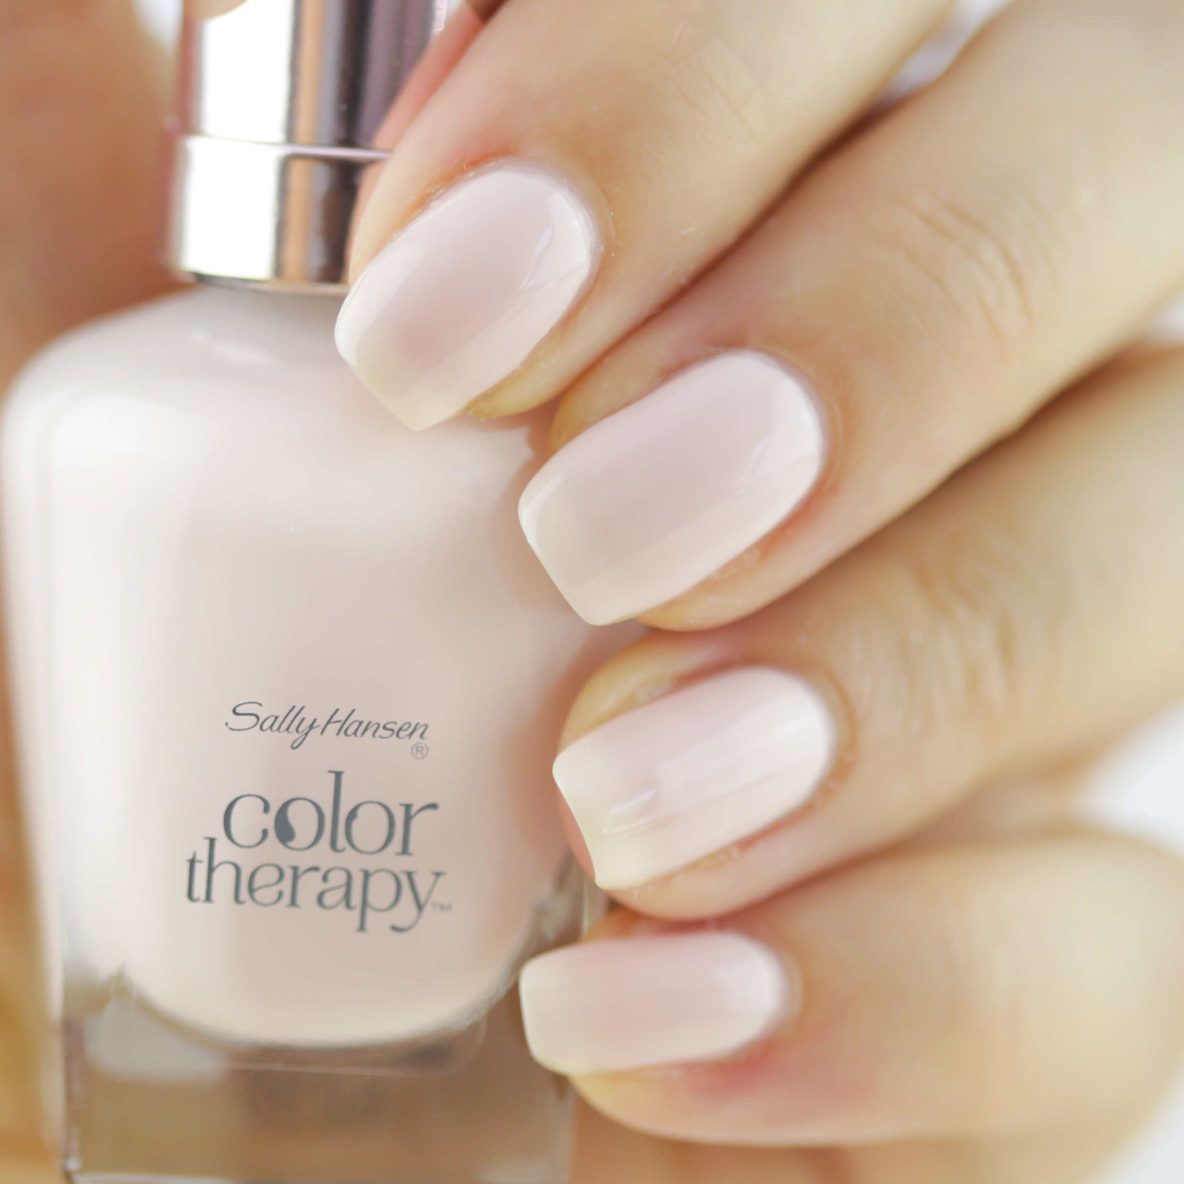 Give Your Nails Spa Luxury With New Sally Hansen Color Therapy Nail That Accent Sally Hansen Nail Polish Sally Hansen Color Therapy Sally Hansen